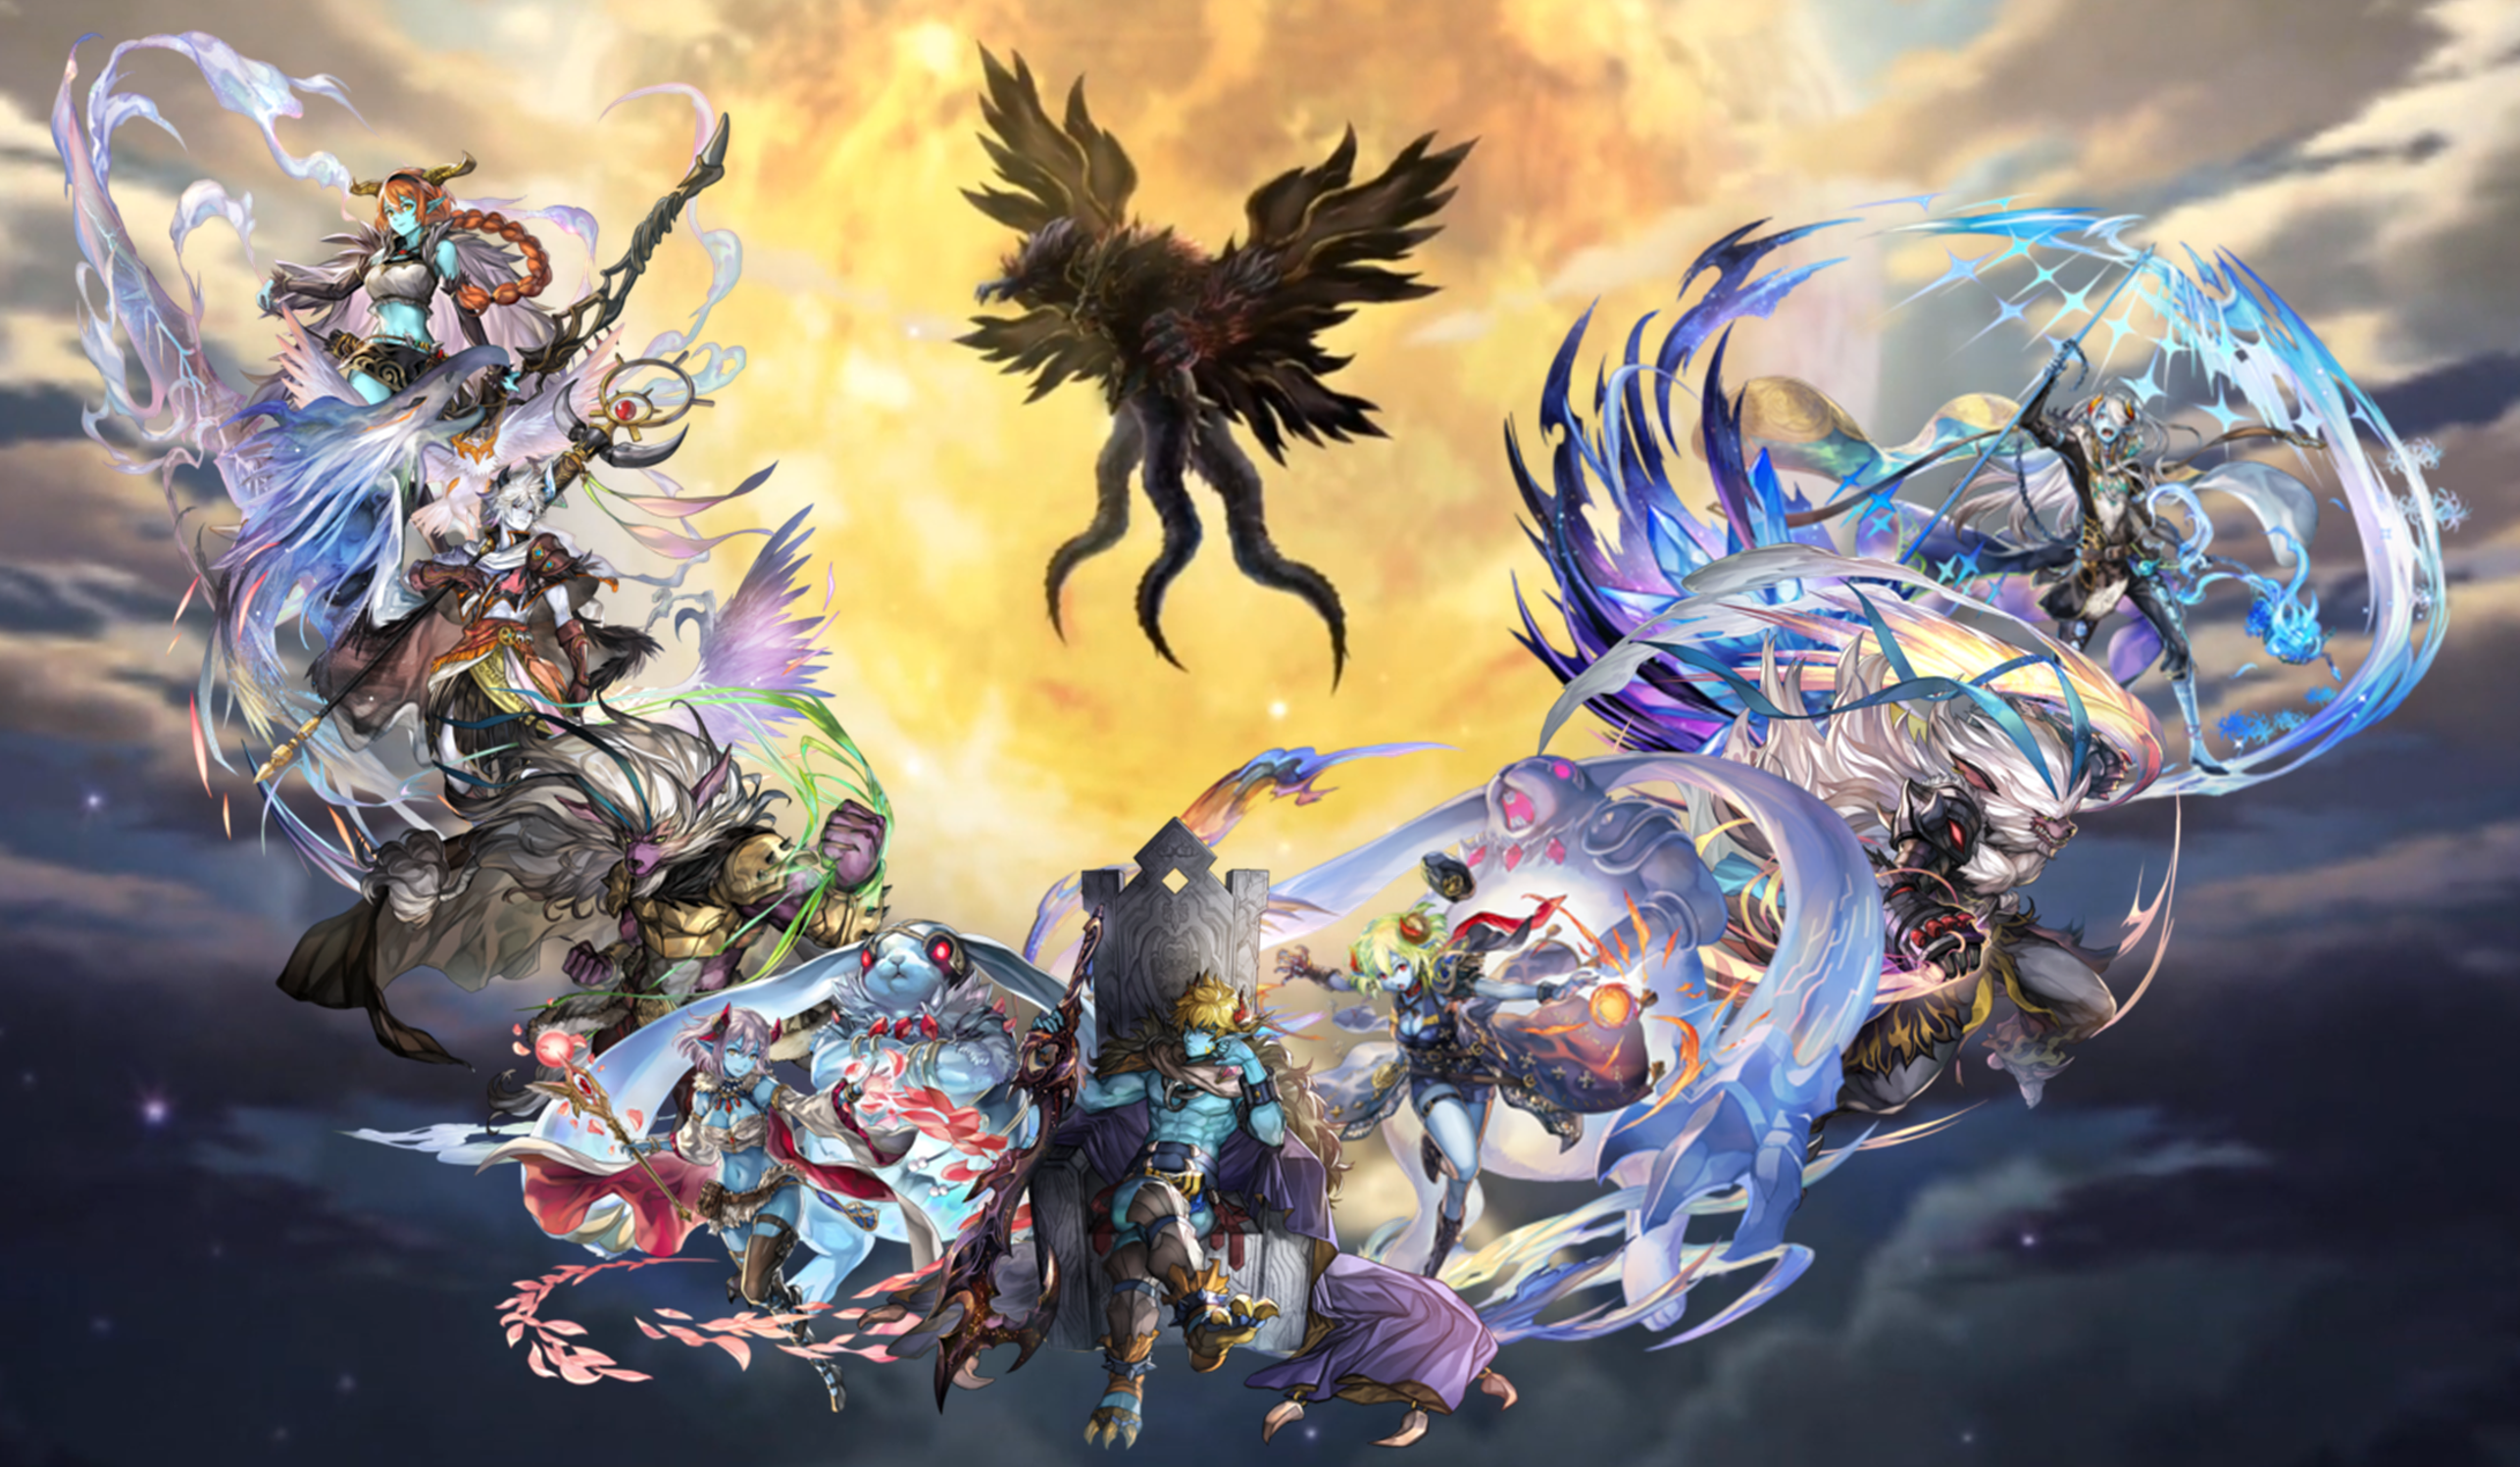 I made some more Another Eden Desktop Wallpaper (JP Characters included)